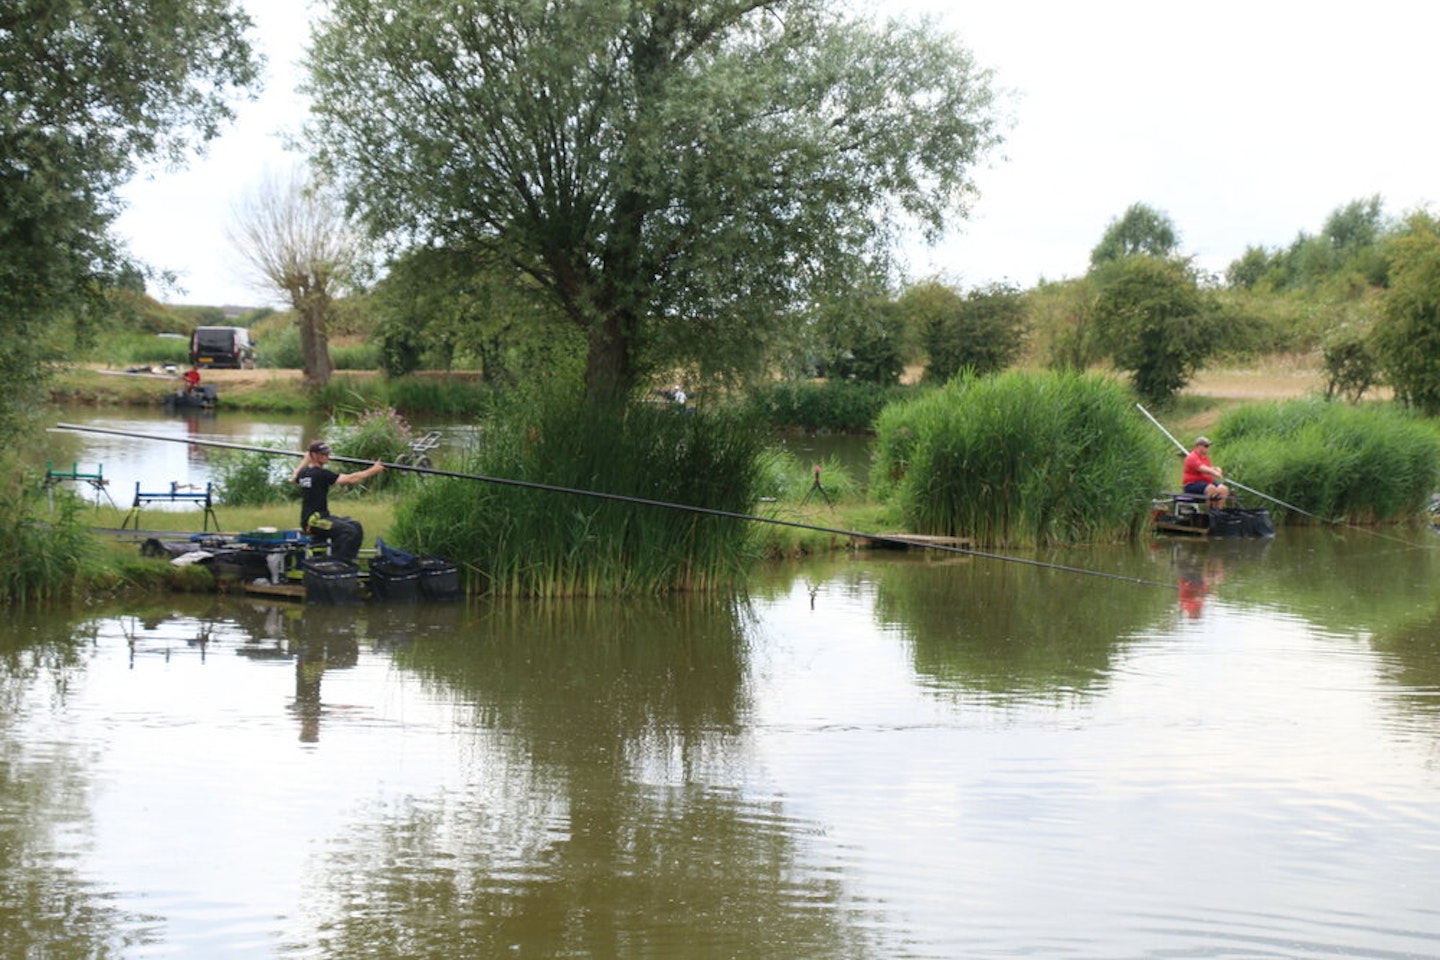 FA CUP OF ANGLING’ WILL BE UK'S FIRST 100K MATCH